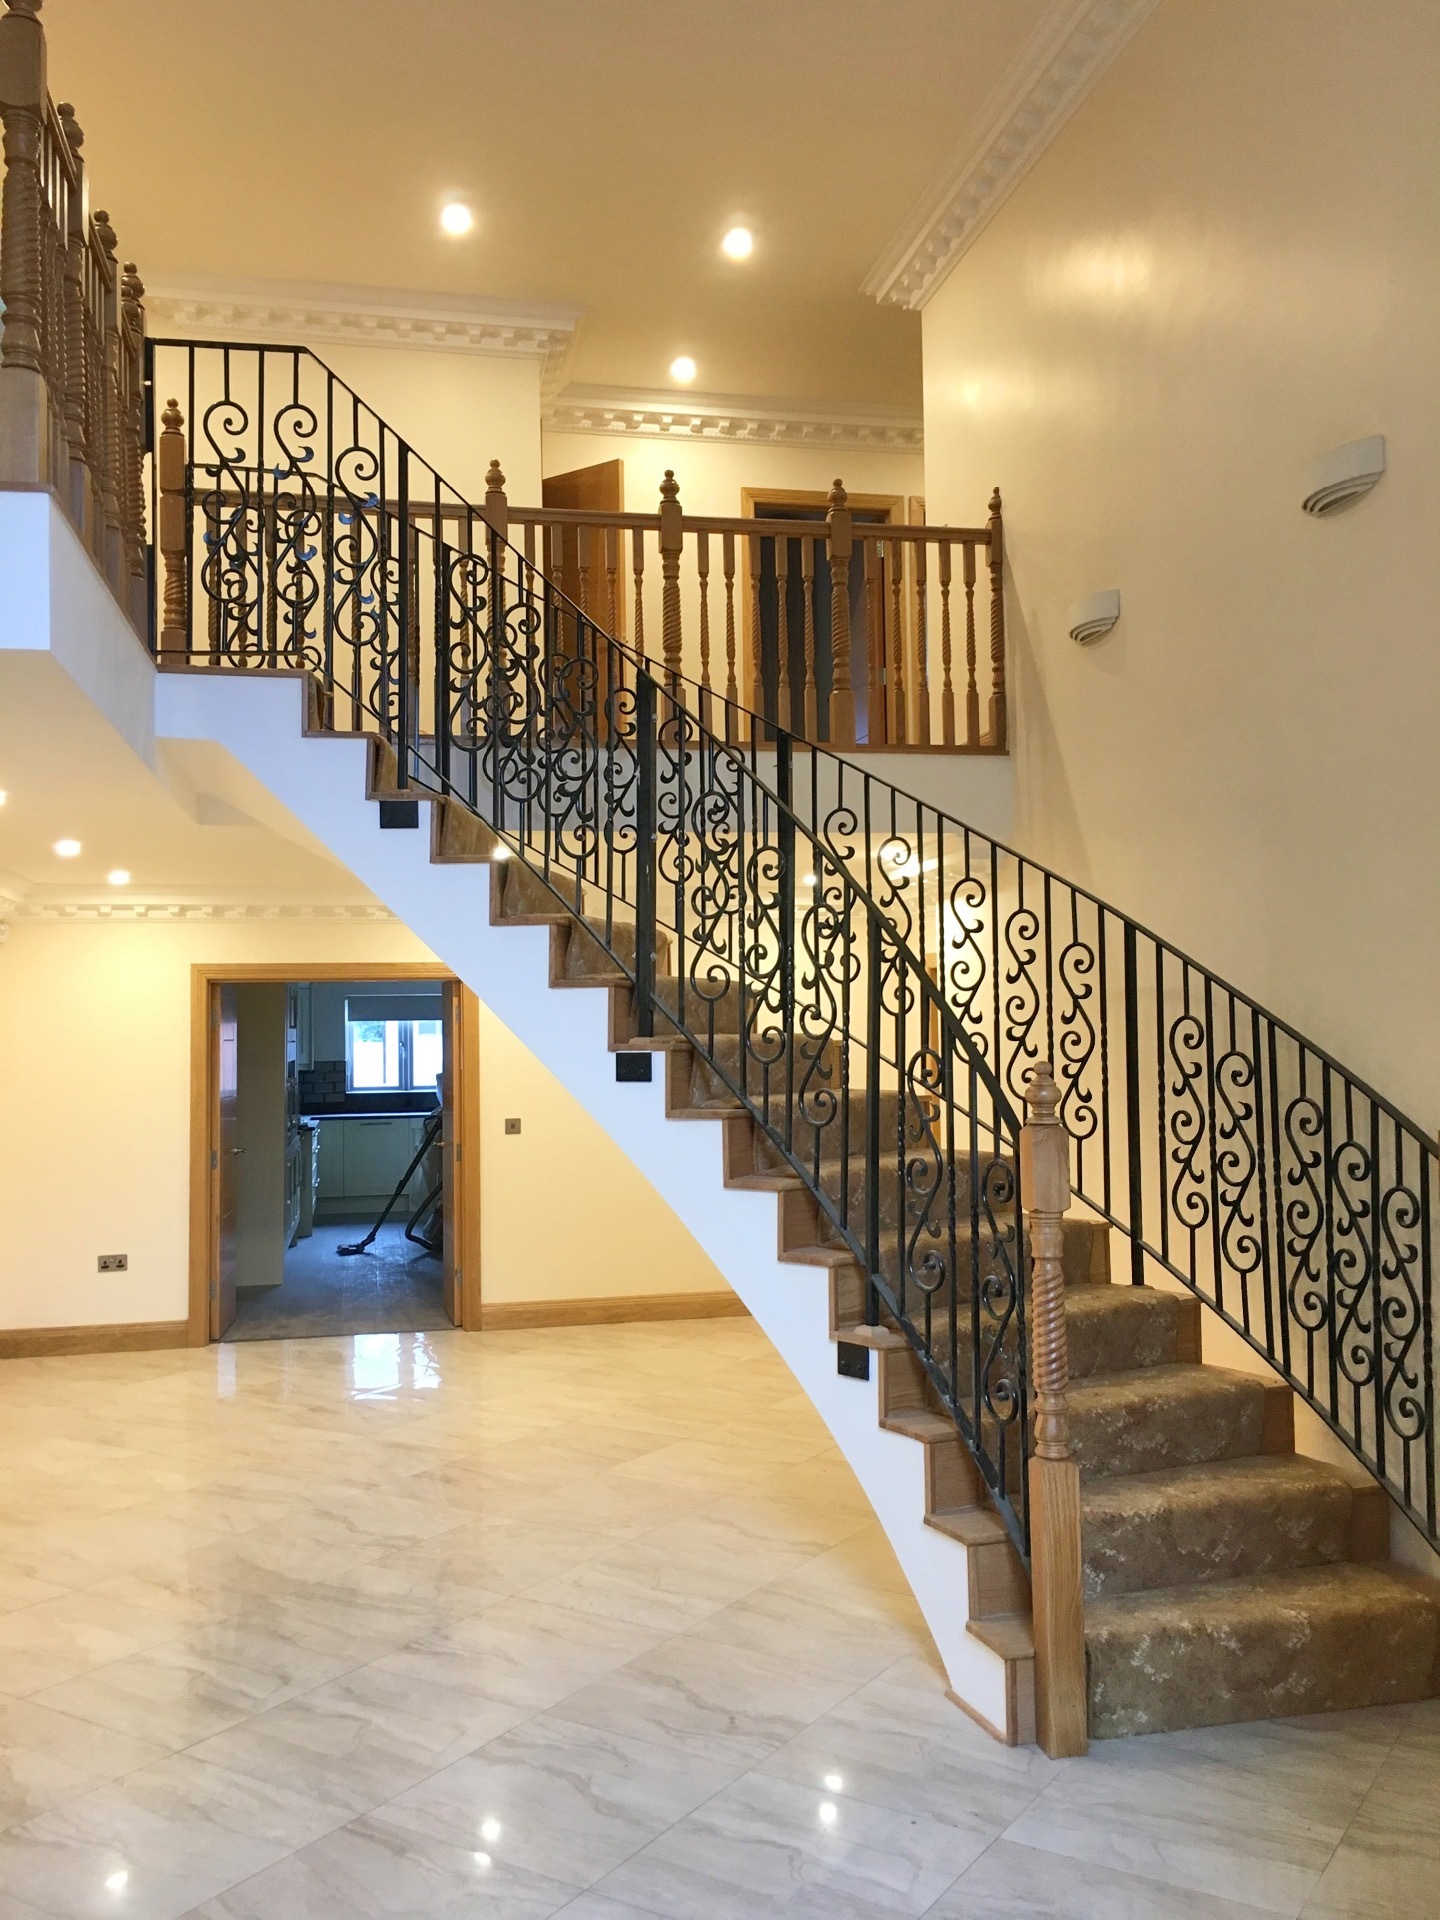 Finished curved stair - Precast Concrete stair design completed with elegant curve